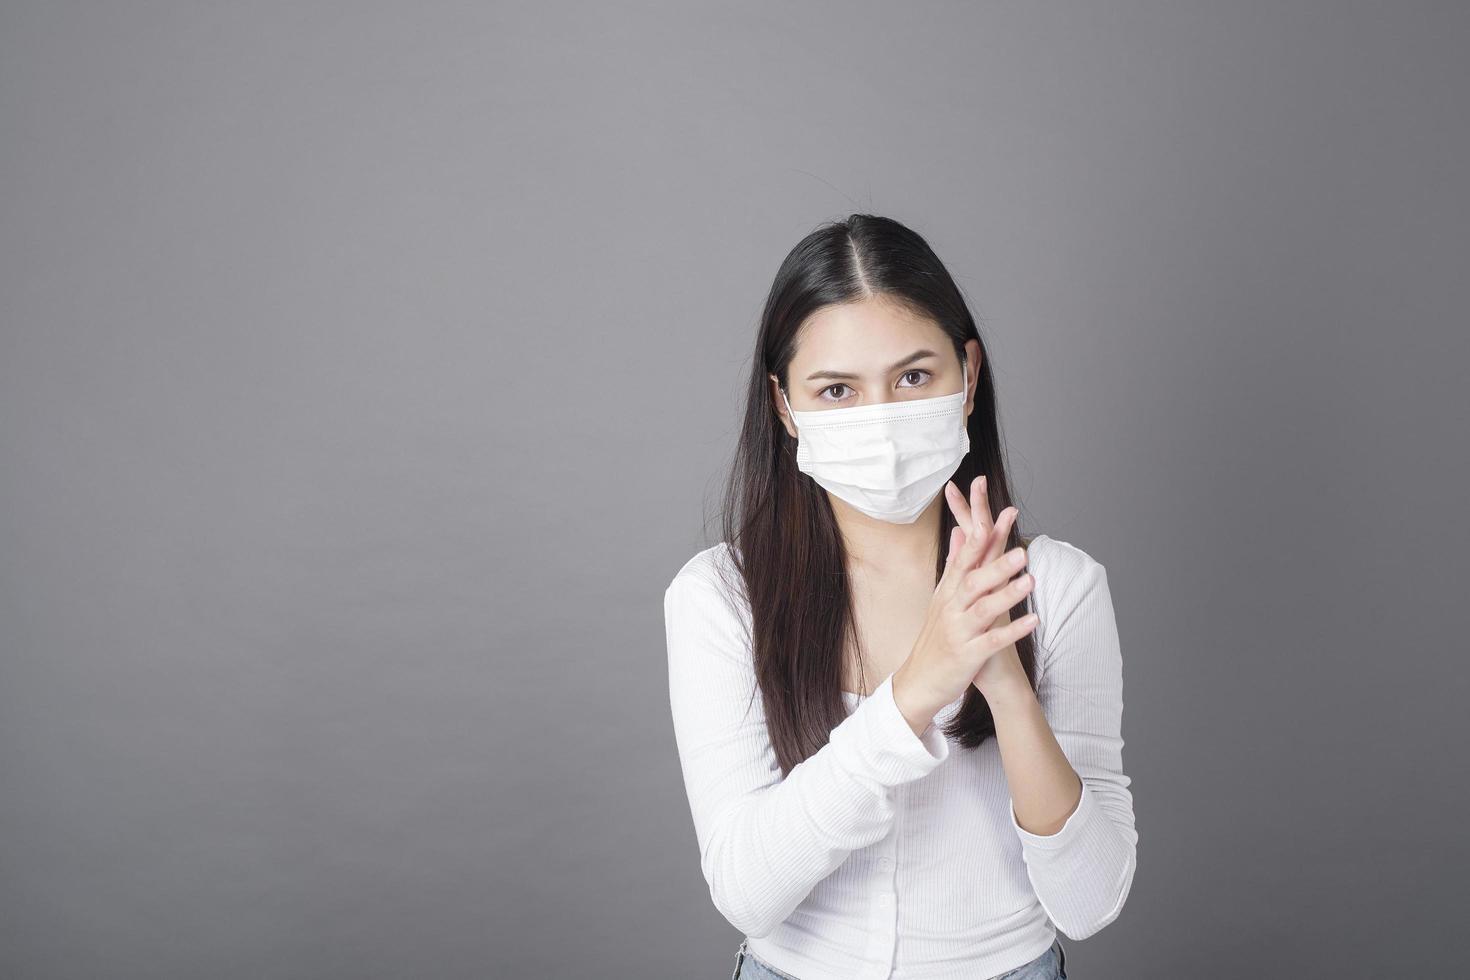 Portrait of woman with surgical mask using alcohol gel sanitizer photo